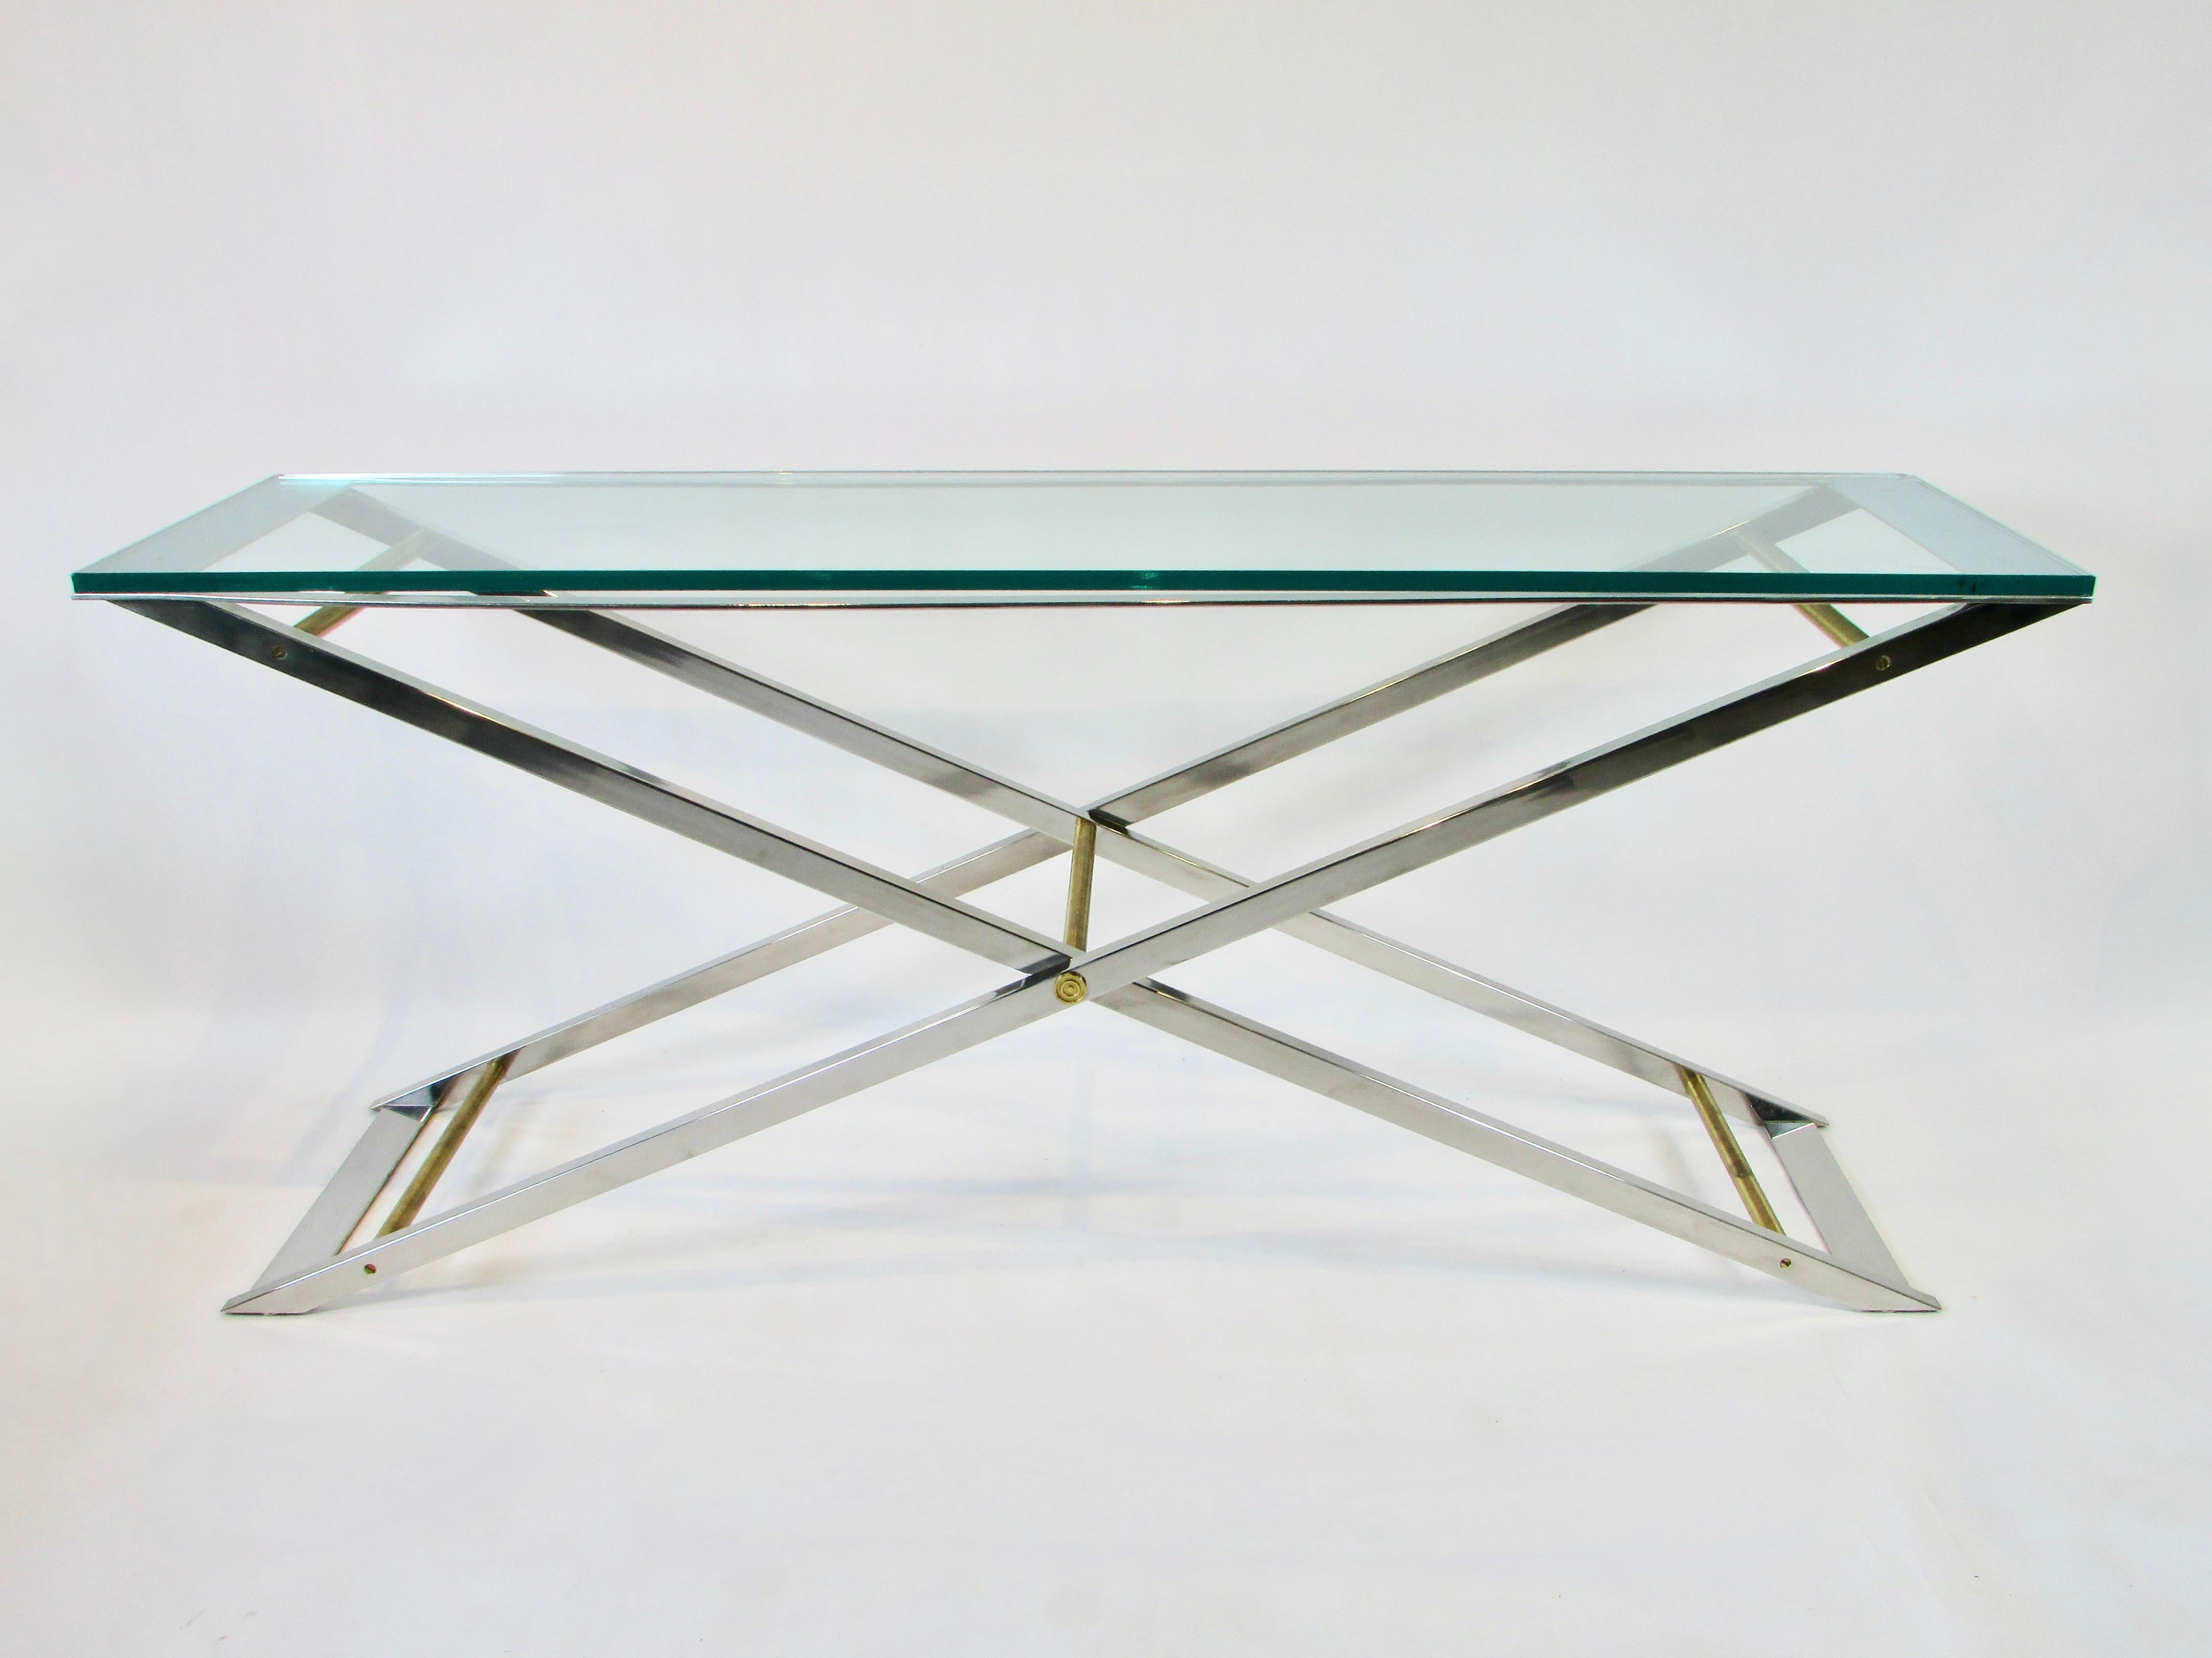 Large John Vesey Style x Frame Polished Chrome and Brass Console or Sofa Table In Good Condition For Sale In Ferndale, MI